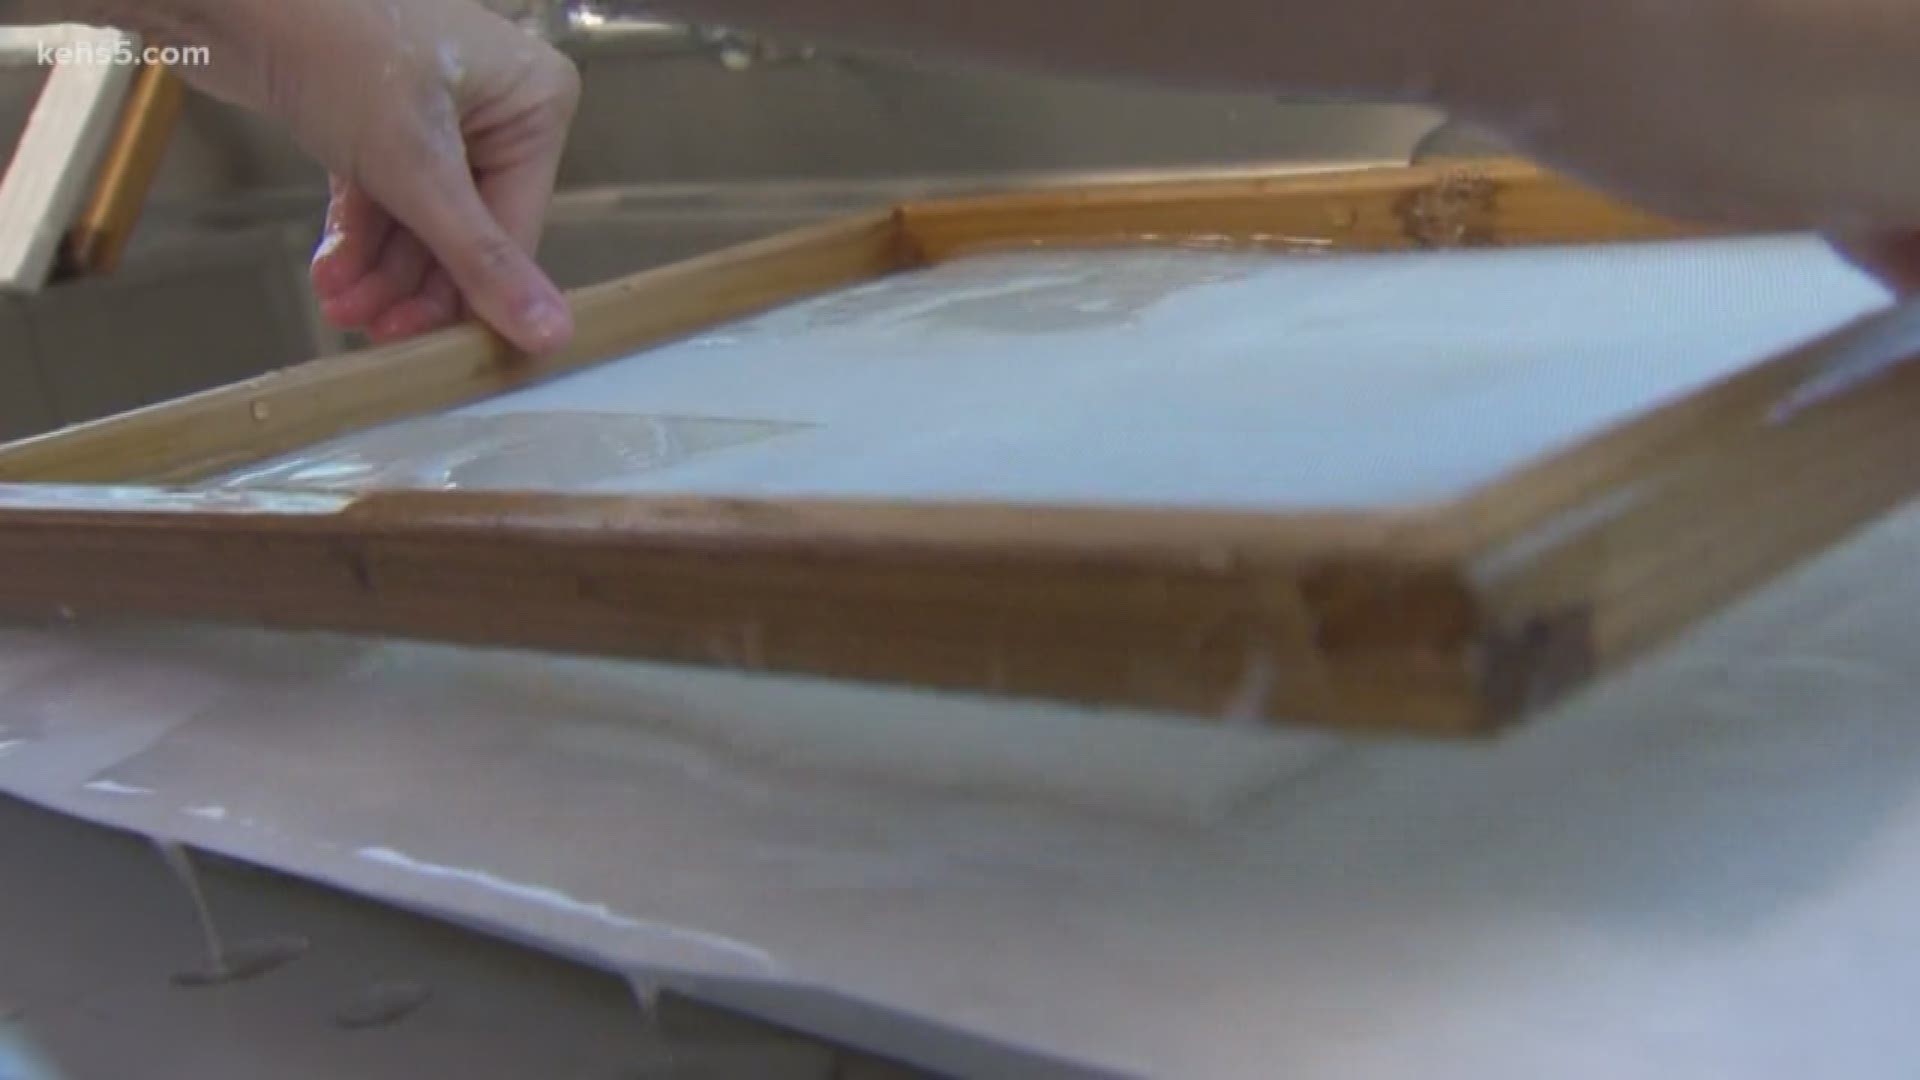 Getting back to the basics in the digital age is proving to be a lucrative business for one woman. In this week's Made in SA, we traveled outside the city to New Braunfels to get a look at Pressed Paper.